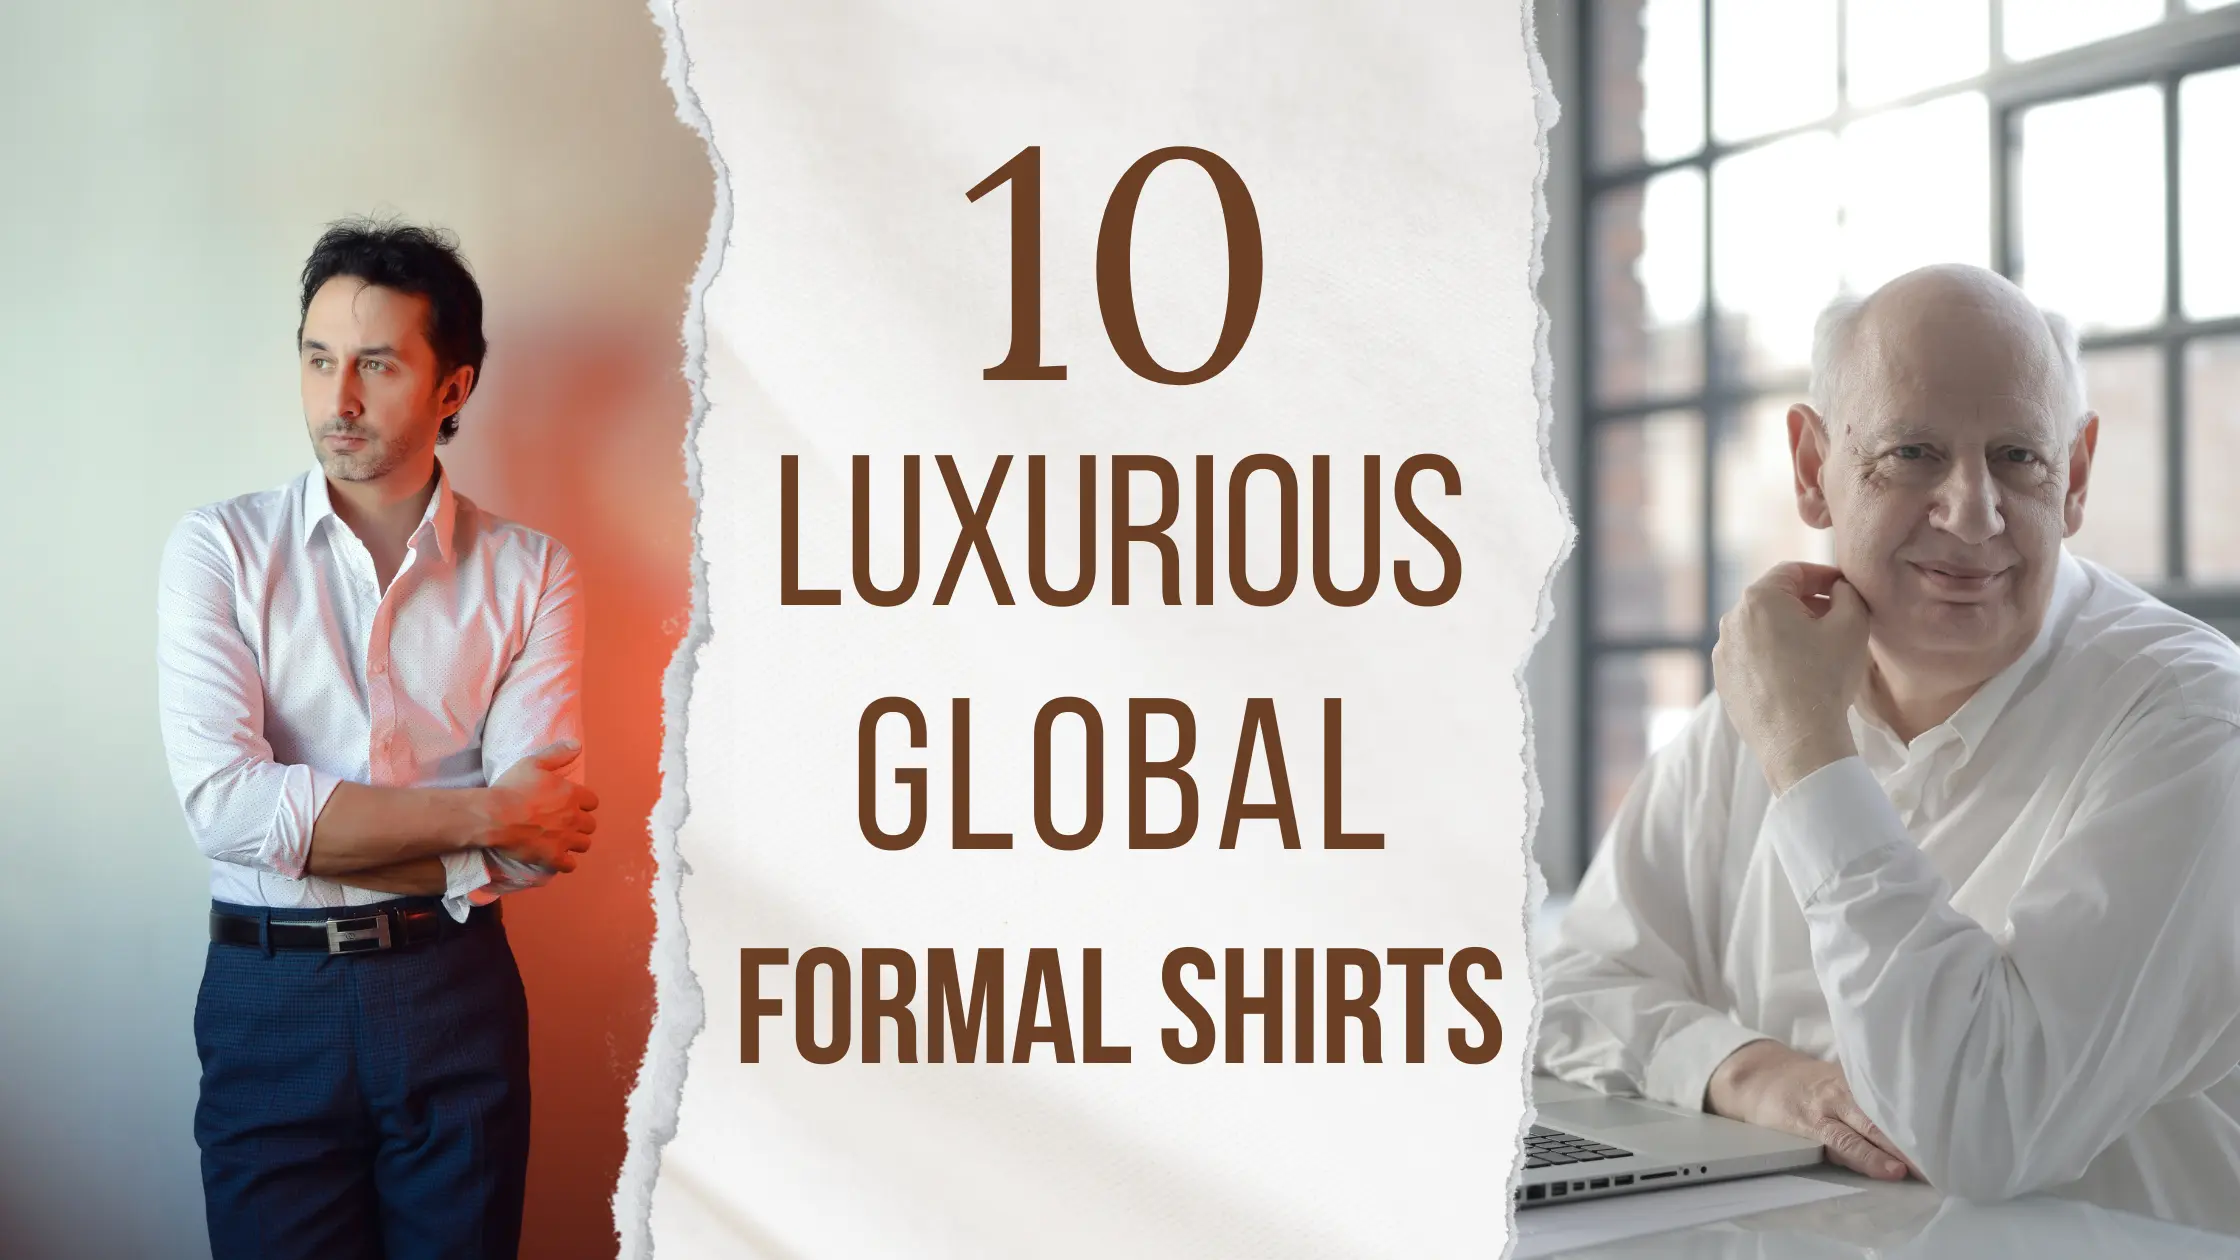 Luxury formal shirts for men in the world.